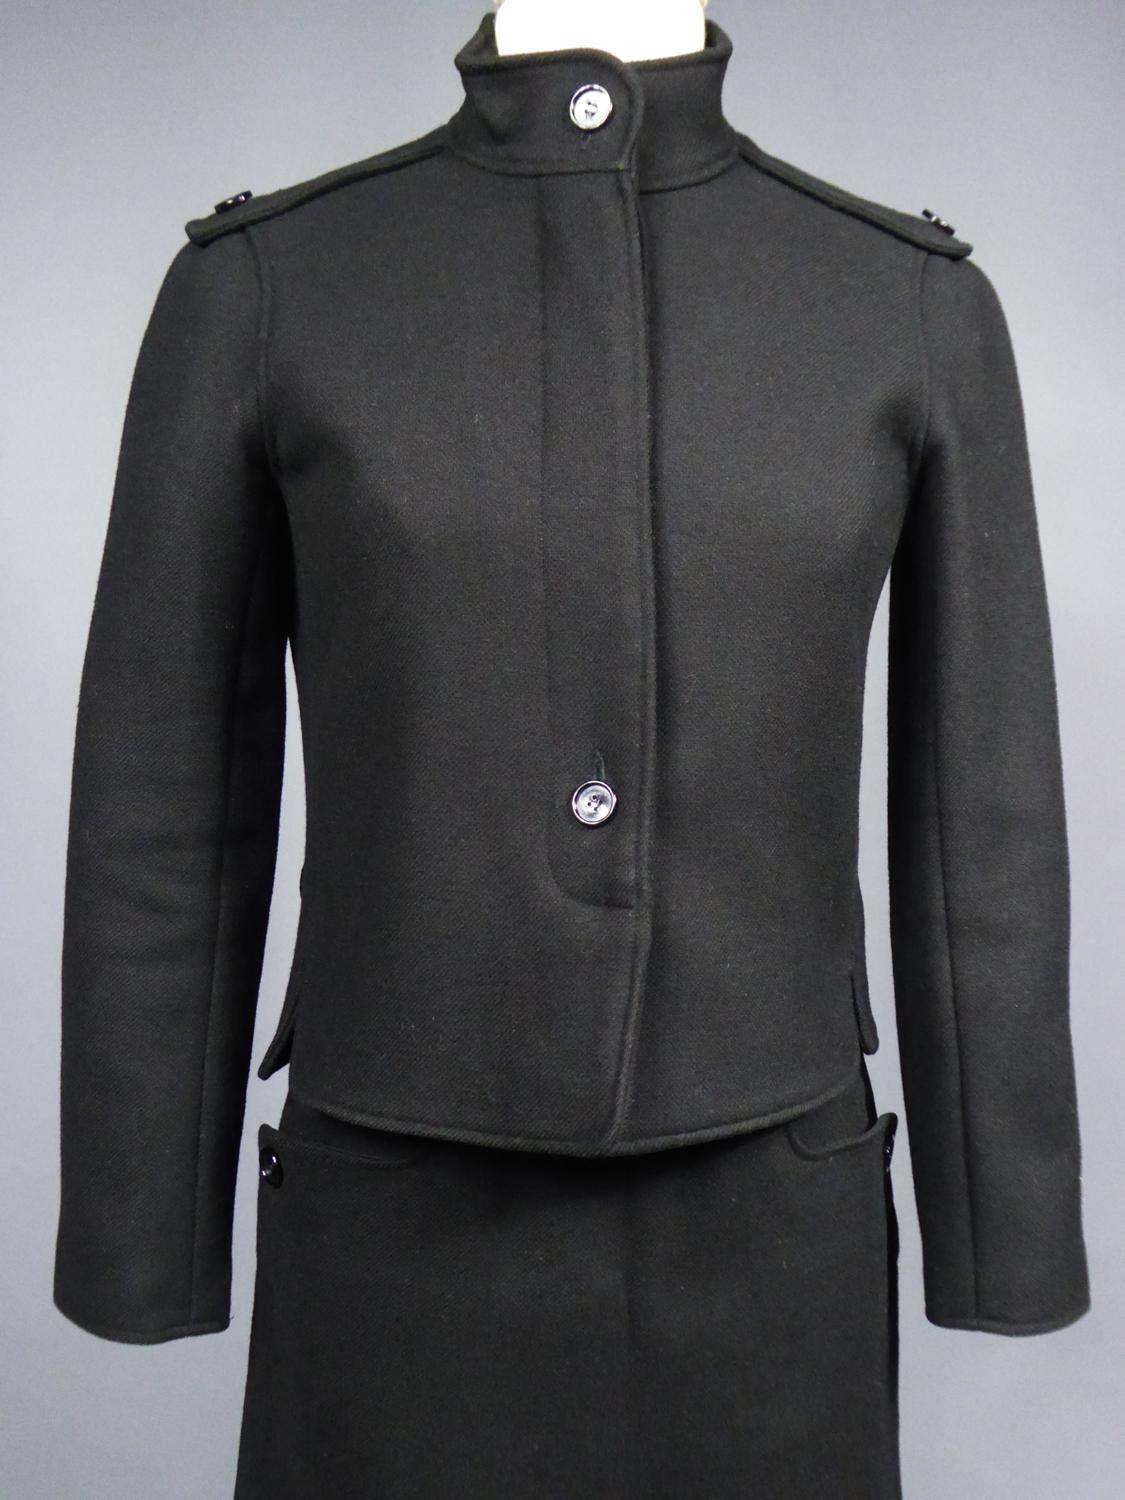 André Courrèges Haute Couture Skirt Suit In Black Wool Circa 1968/1975  For Sale 1